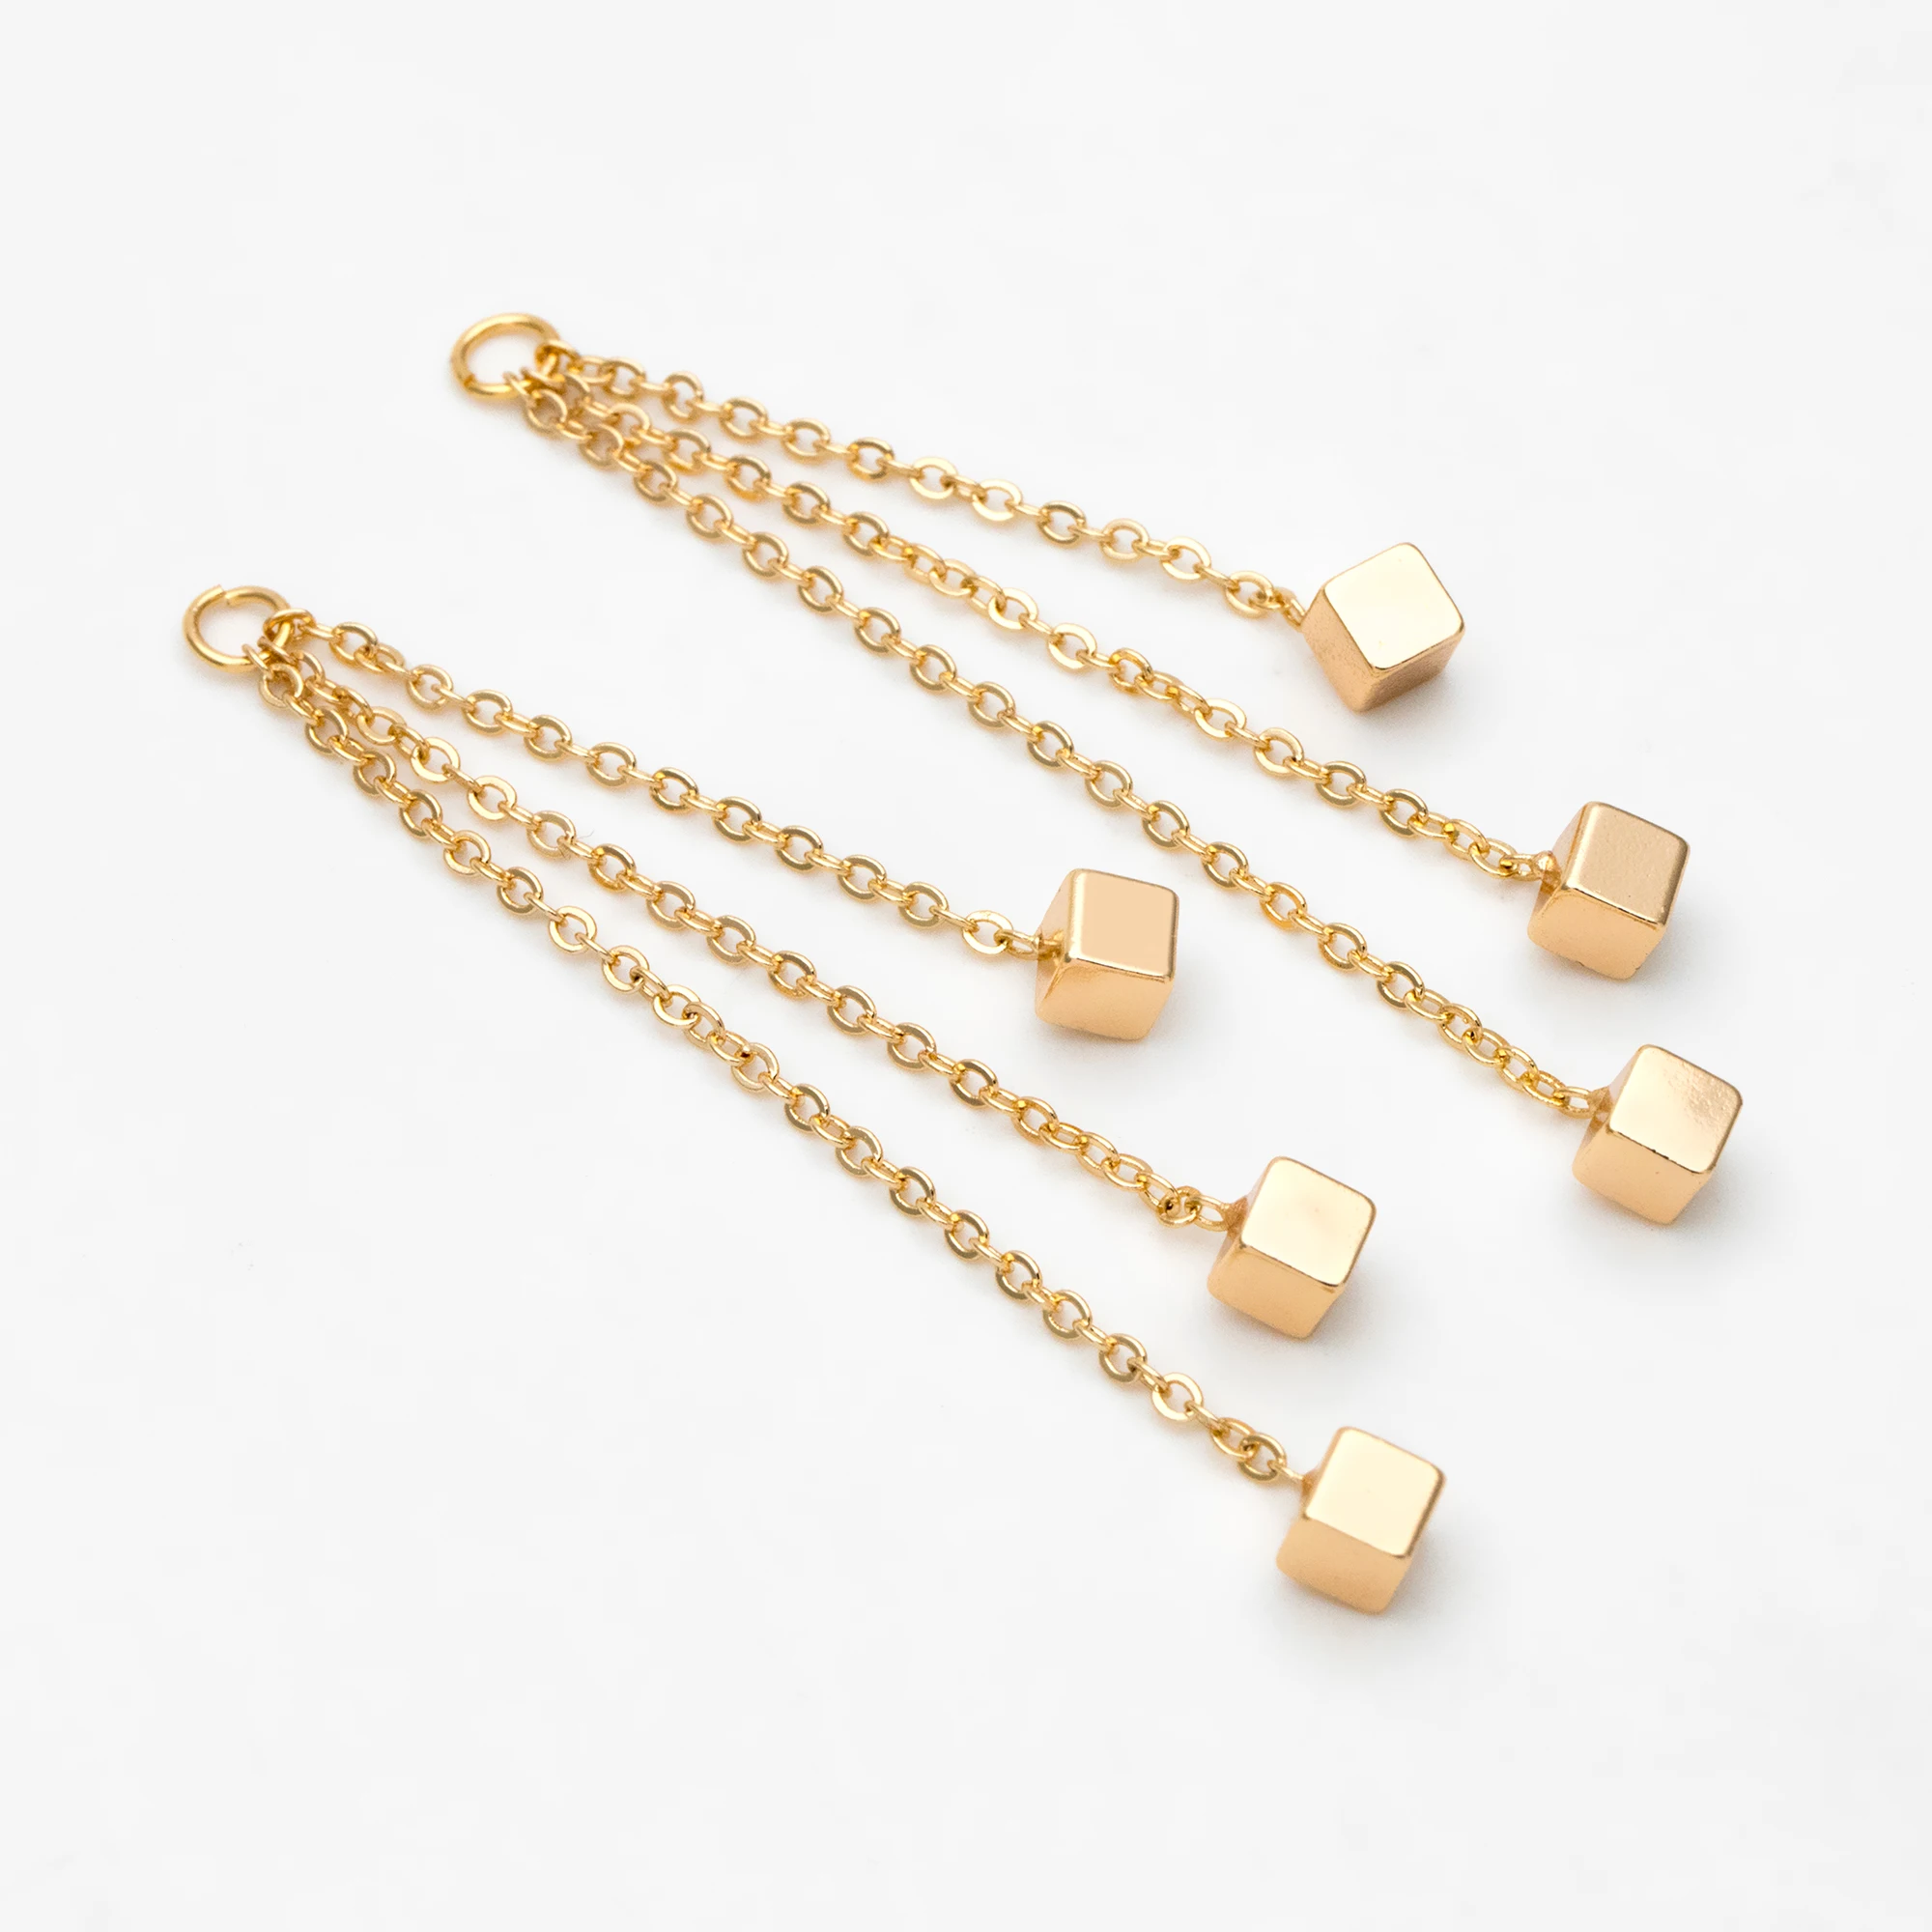 4pcs Chain Tassel Earring Charms with Cube, Gold Plated Brass Chain Pendants, Long Chain Earwire Components (GB-3344)